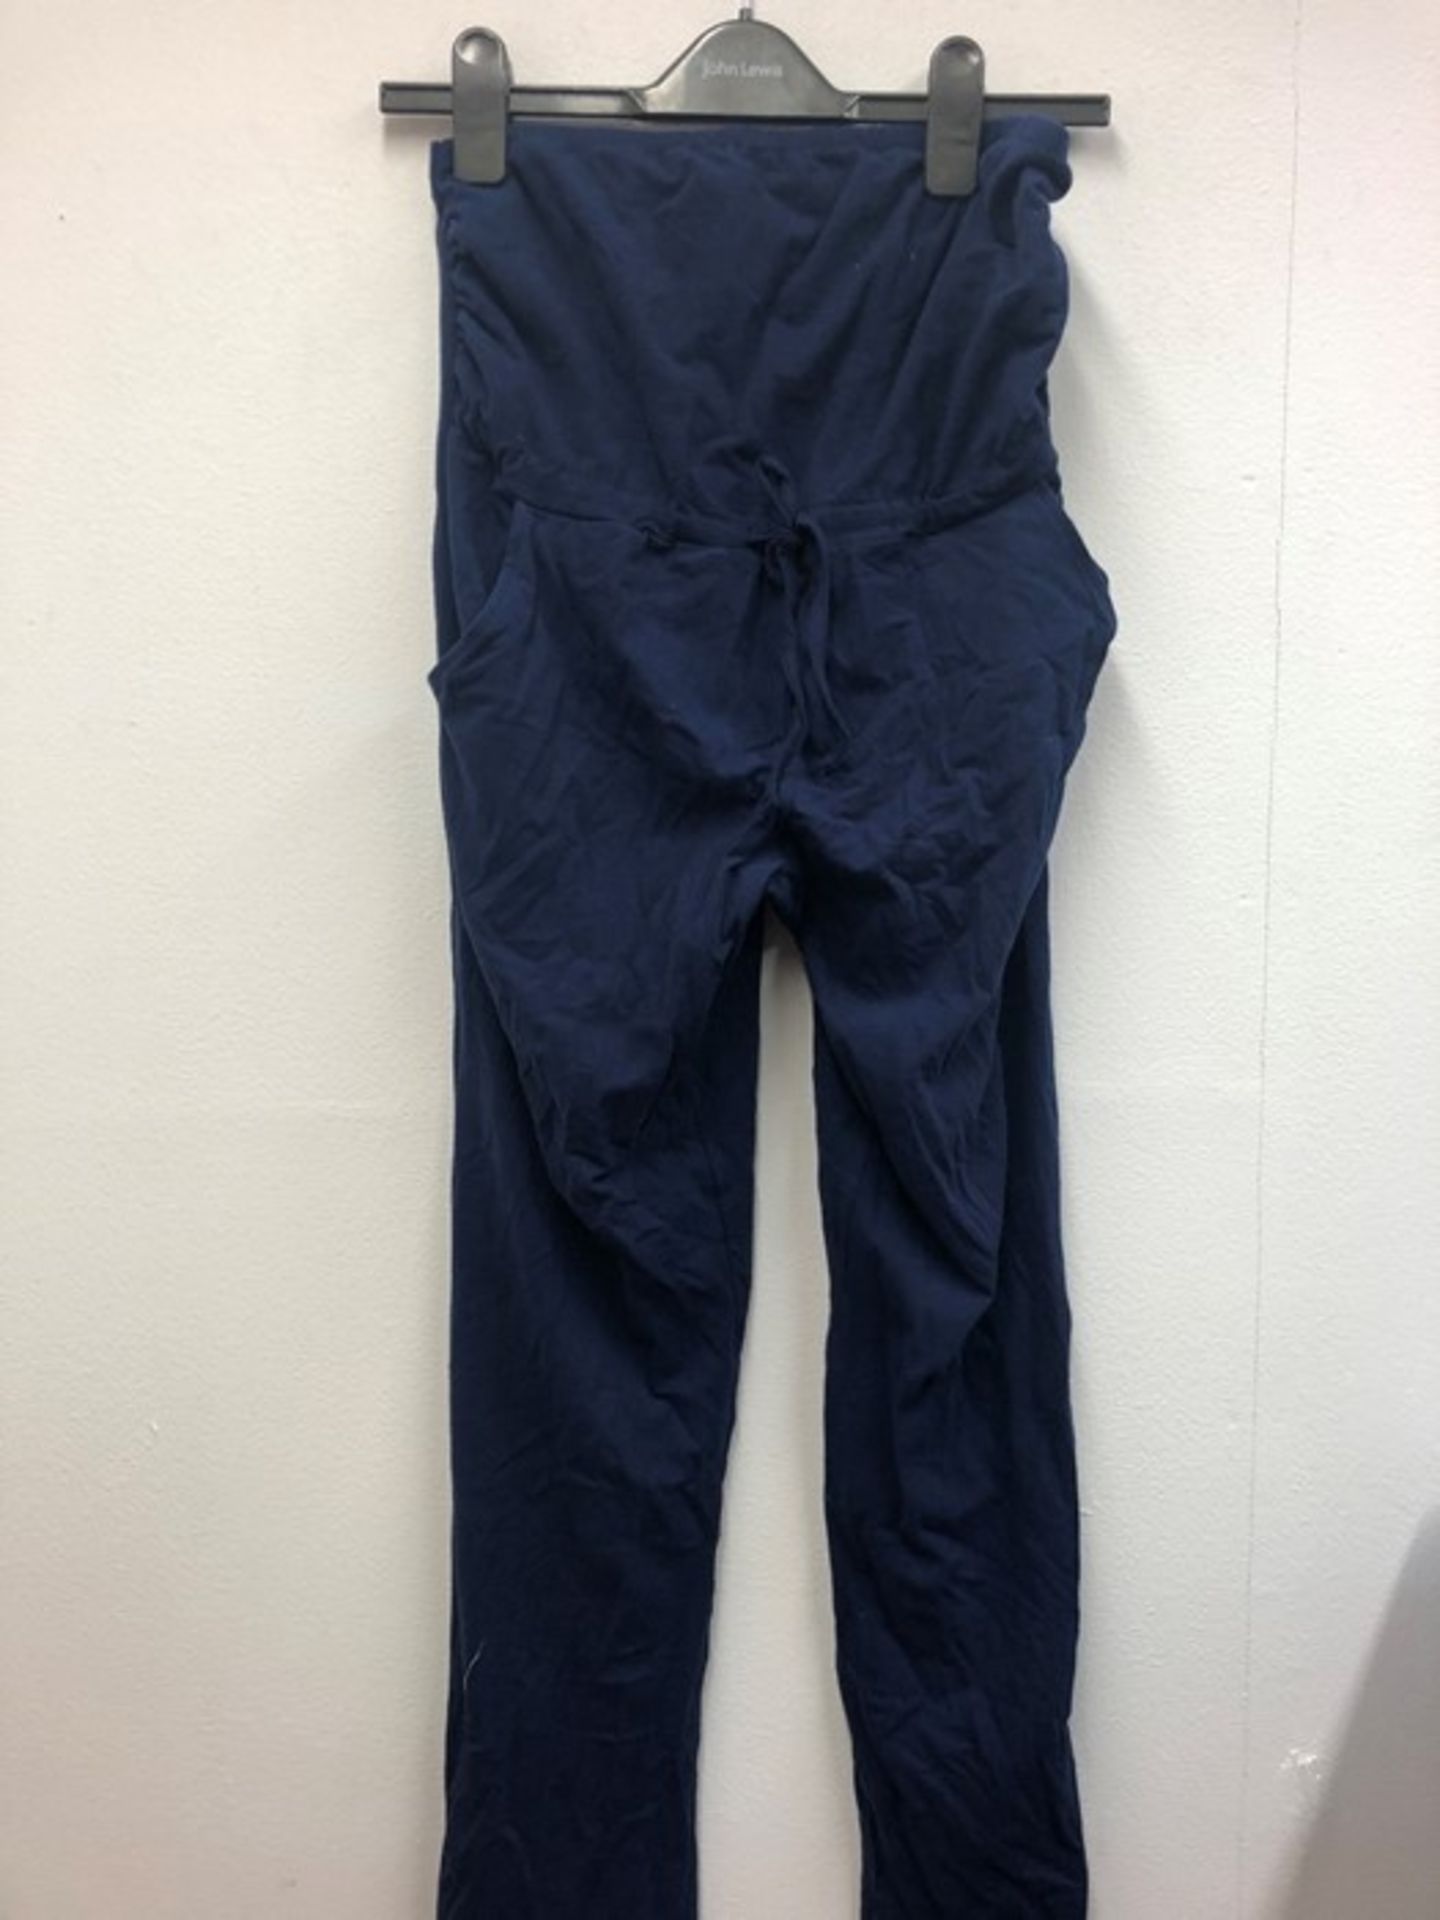 1 AS NEW LA REDOUTE PANTS IN NAVY / SIZE 10/12 (VI